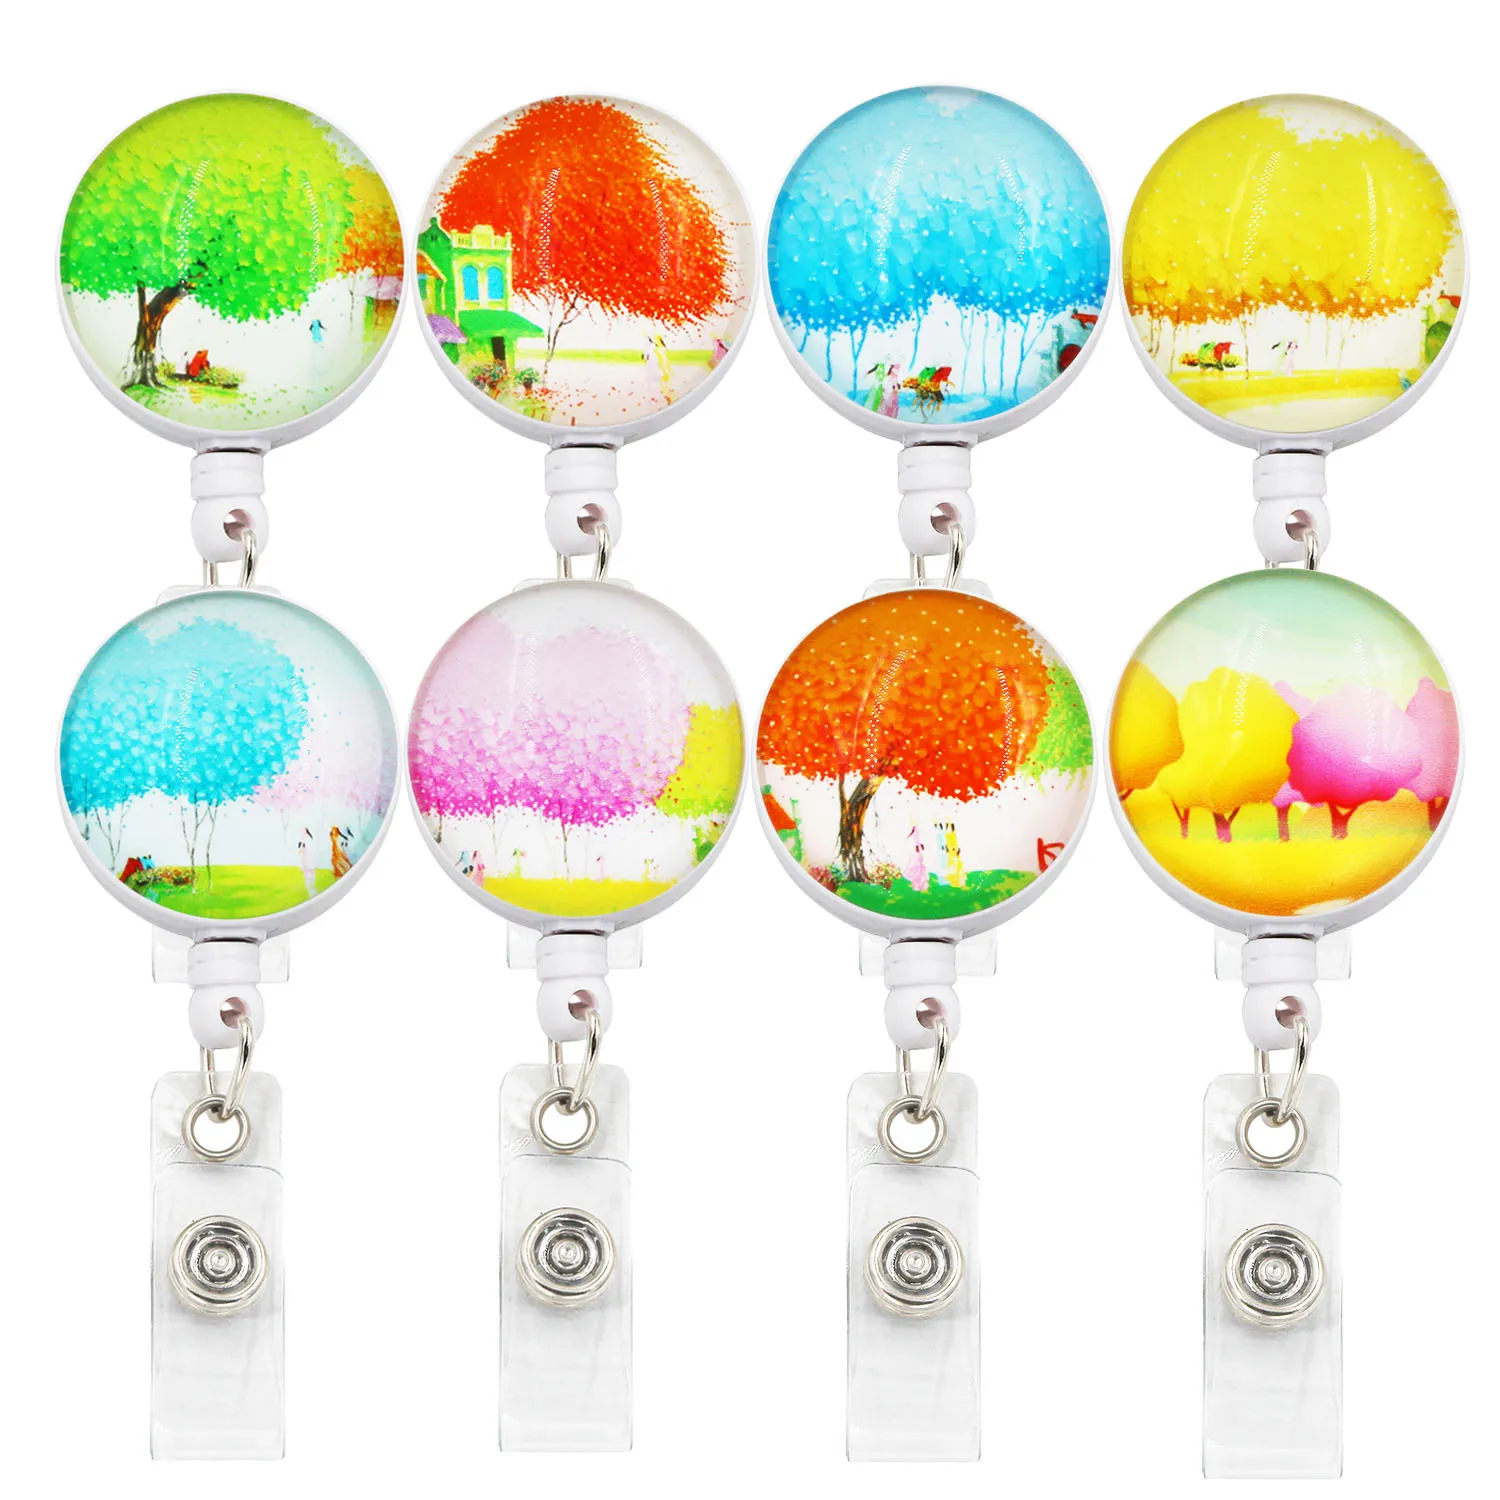 idclip lot id retractable badge holder with alligator clip life tree retractable cord id badge reel 24 inch